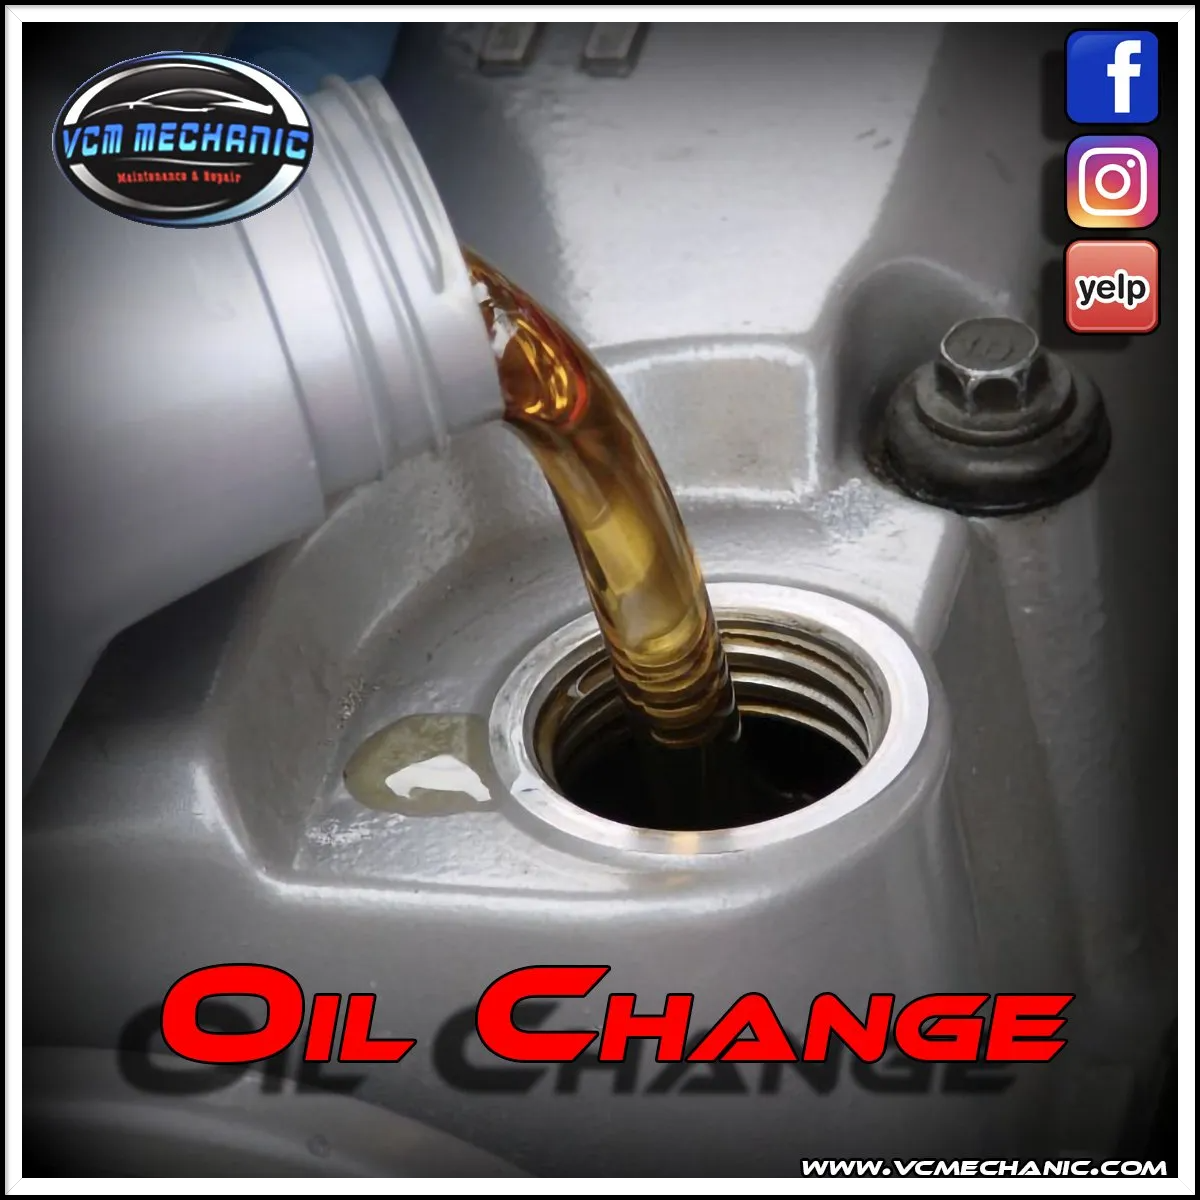 Why do I need oil change?